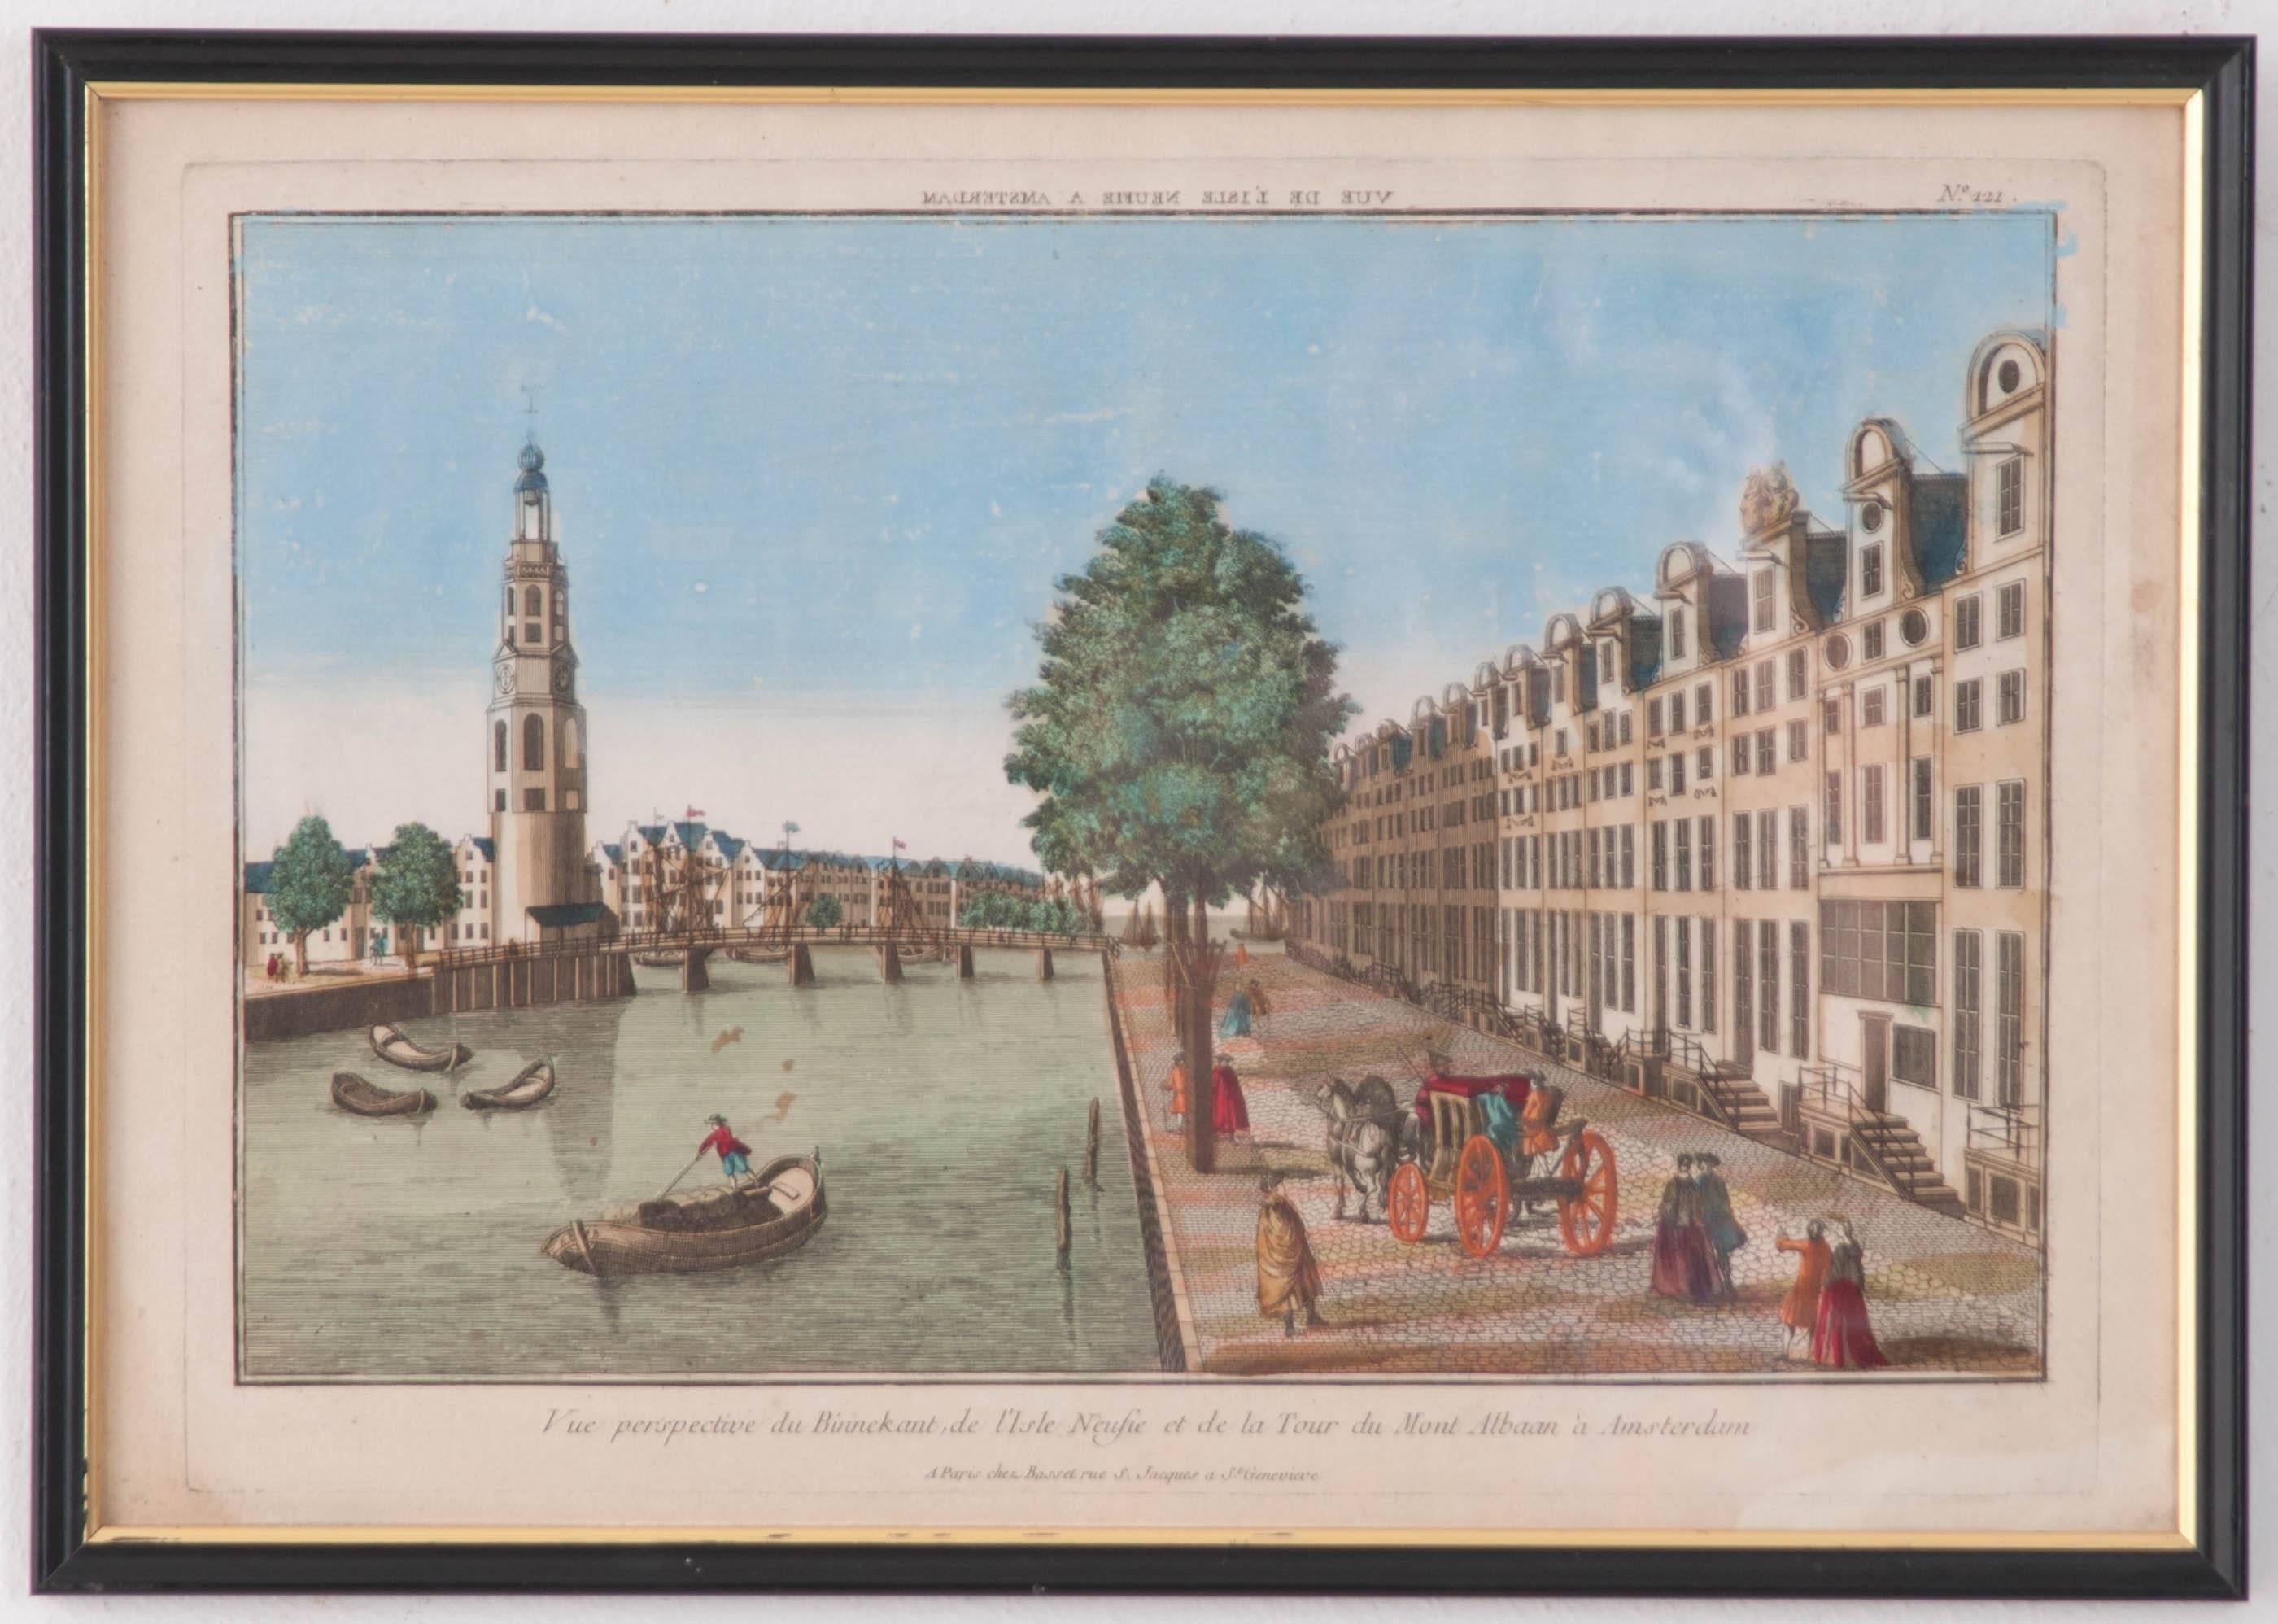 A stunning set of four antique French prints from the late 18th century. Depicting scenes from the interior of Notre Dame, the royal palace at Versailles, the Tower of Mont Albaan and the theater of the magician Circe, wife of Minos, these prints